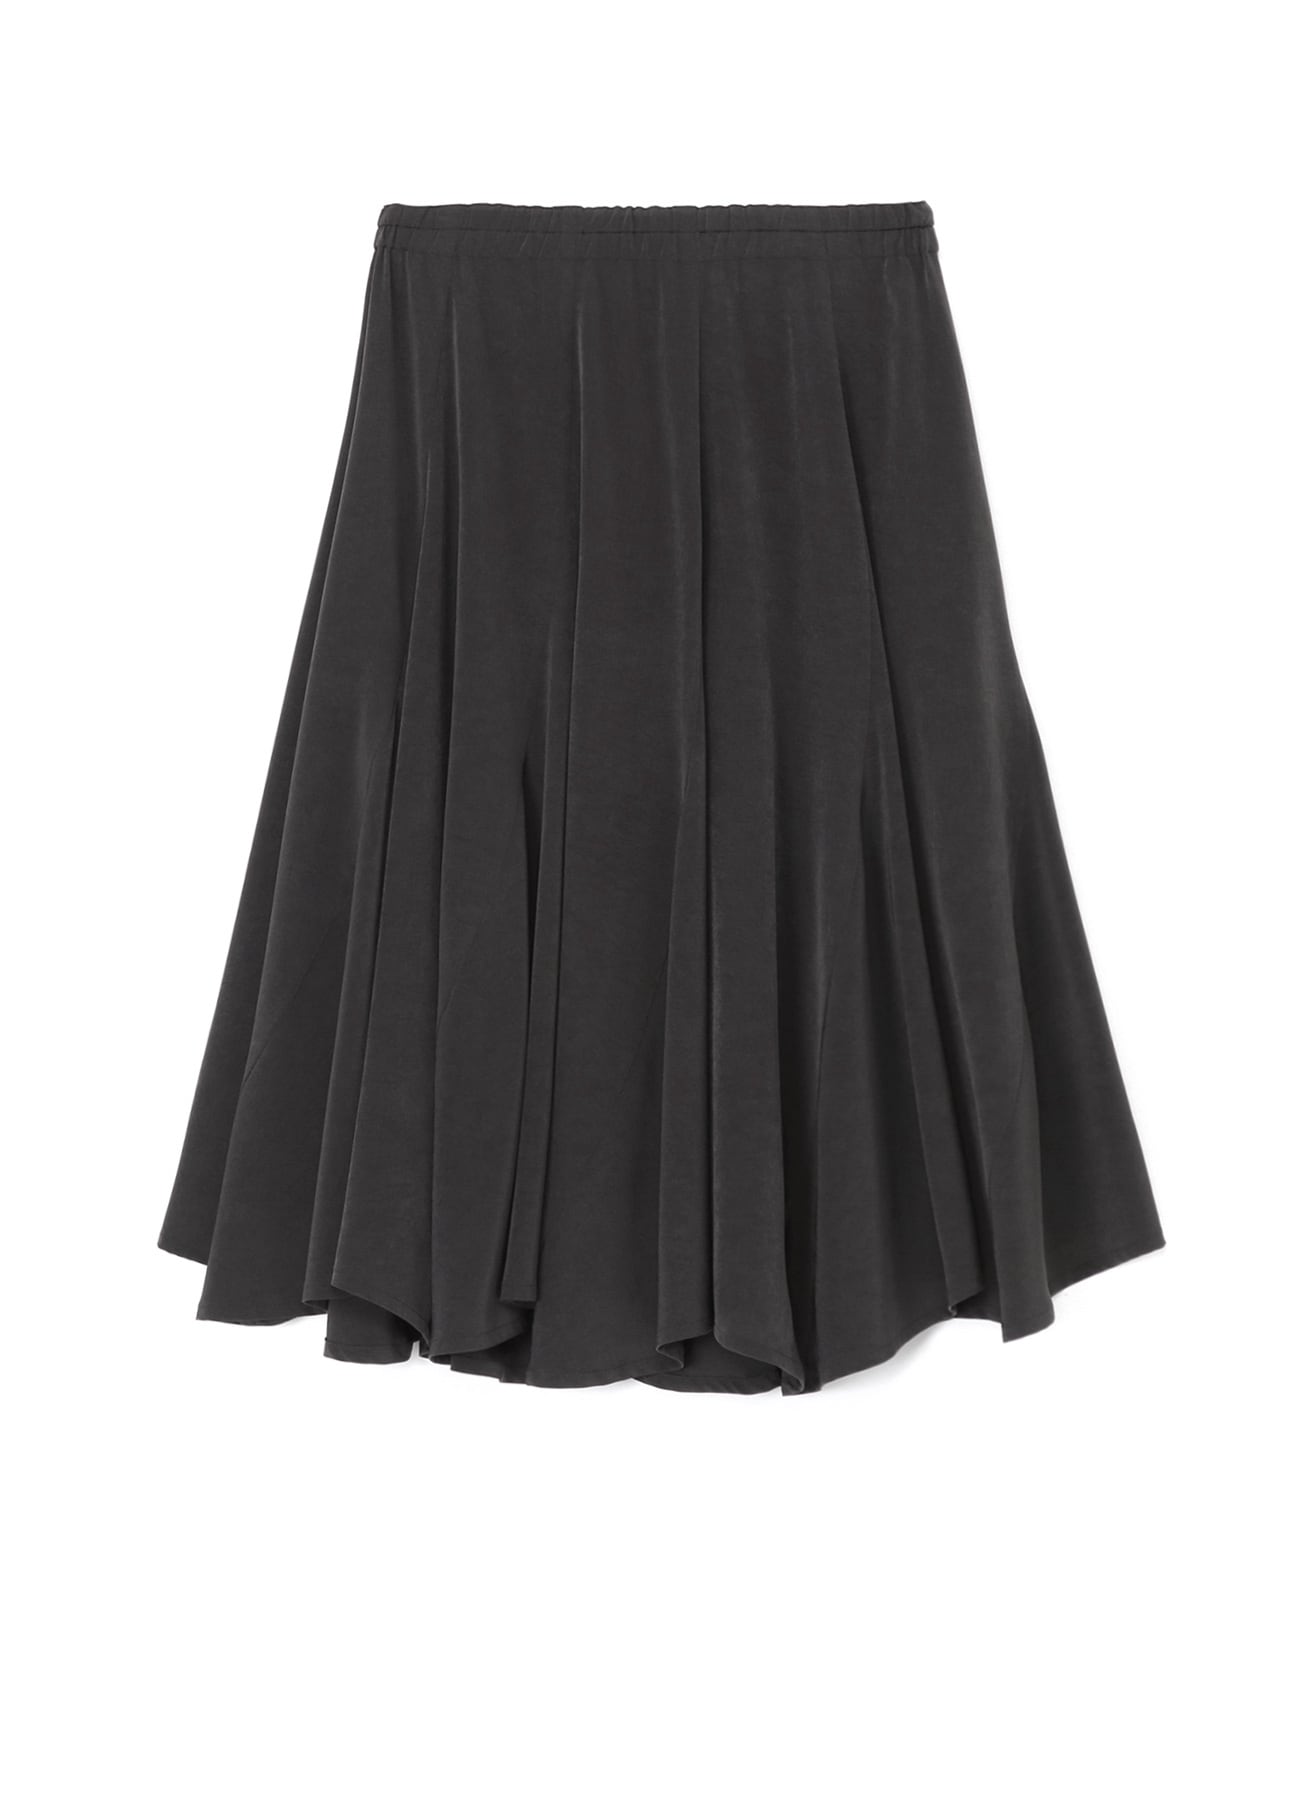 TRIACETATE/POLYESTER CREPE de CHINE 10PIECES GATHERED SKIRT